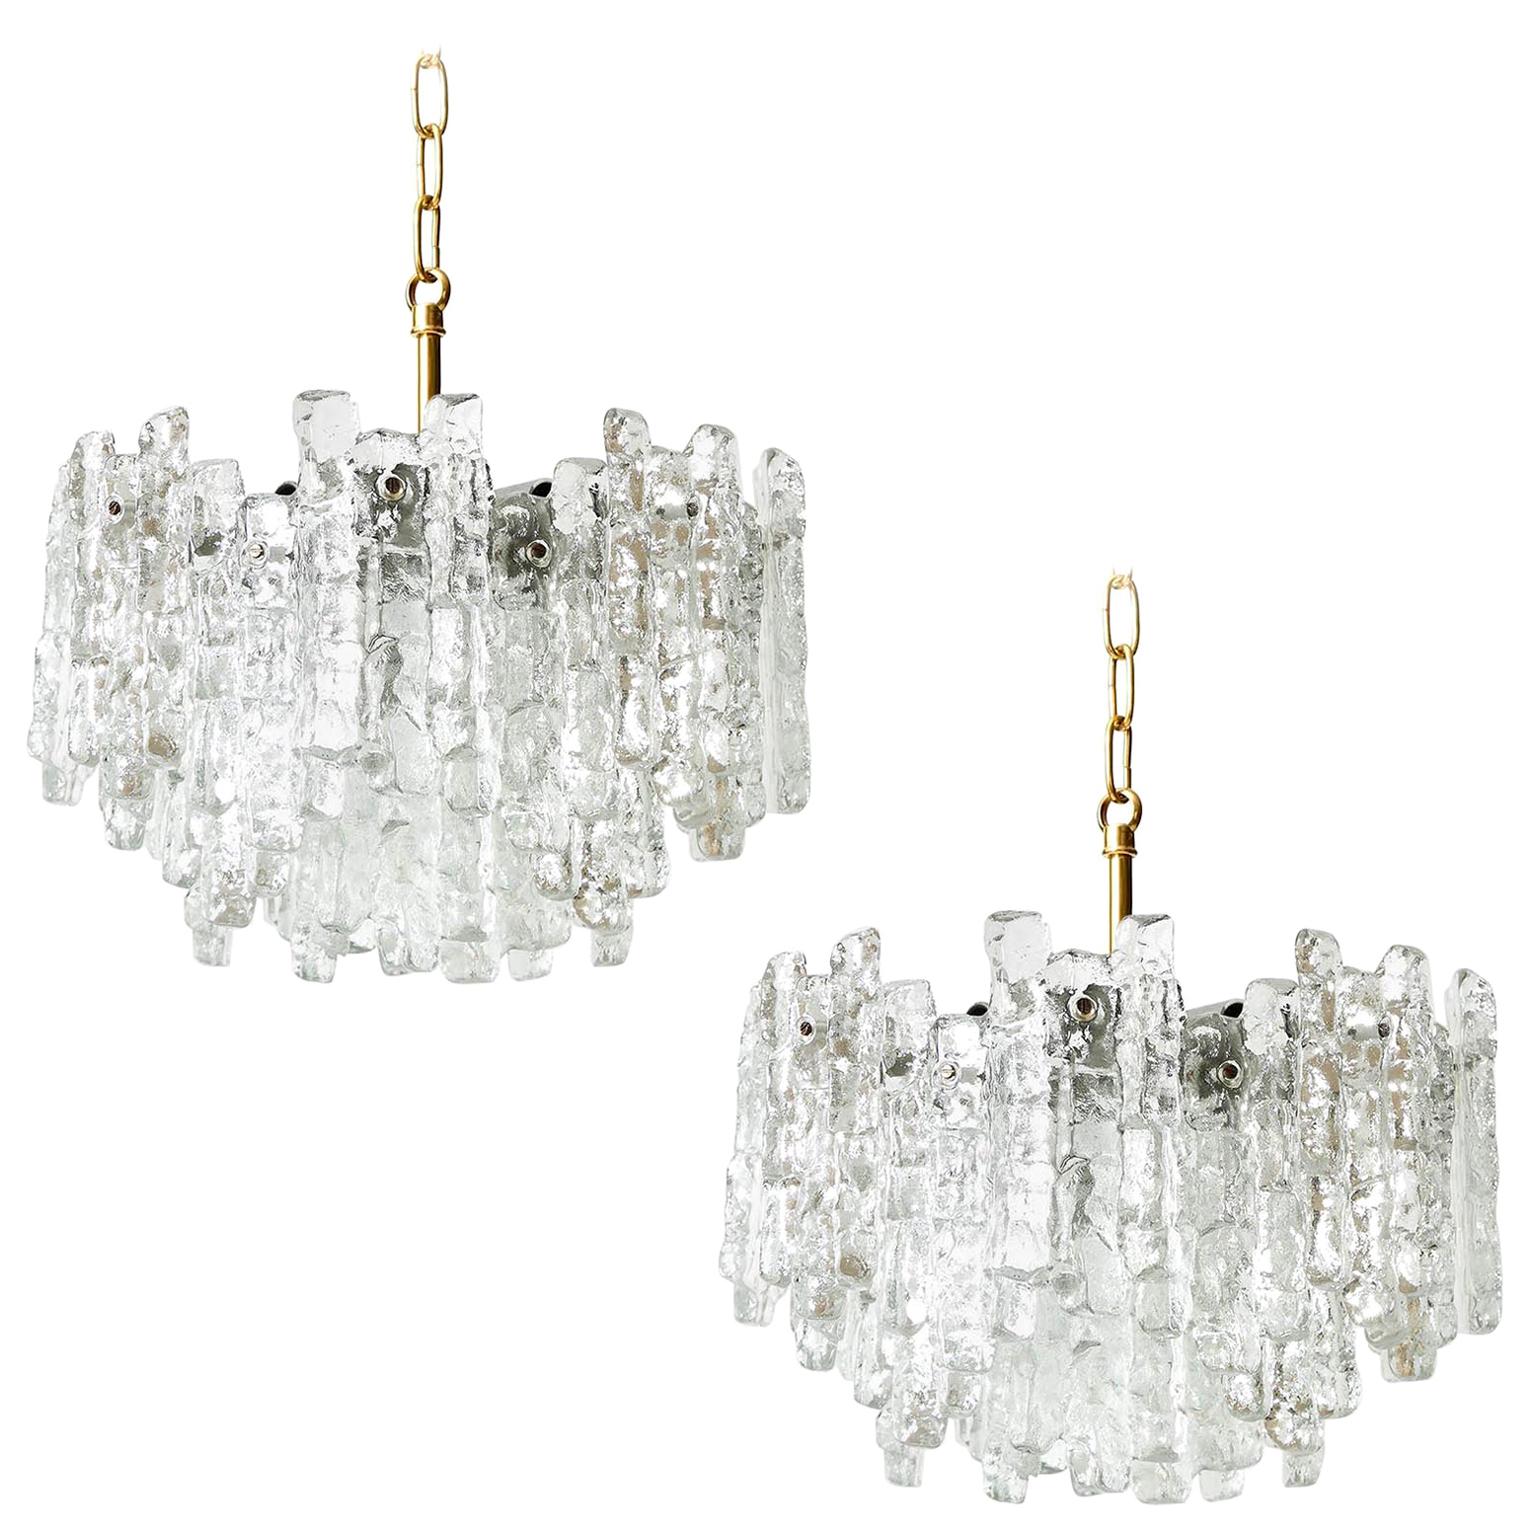 Pair of Kalmar Ice Glass Chandeliers Pendant Lights, 1970 For Sale